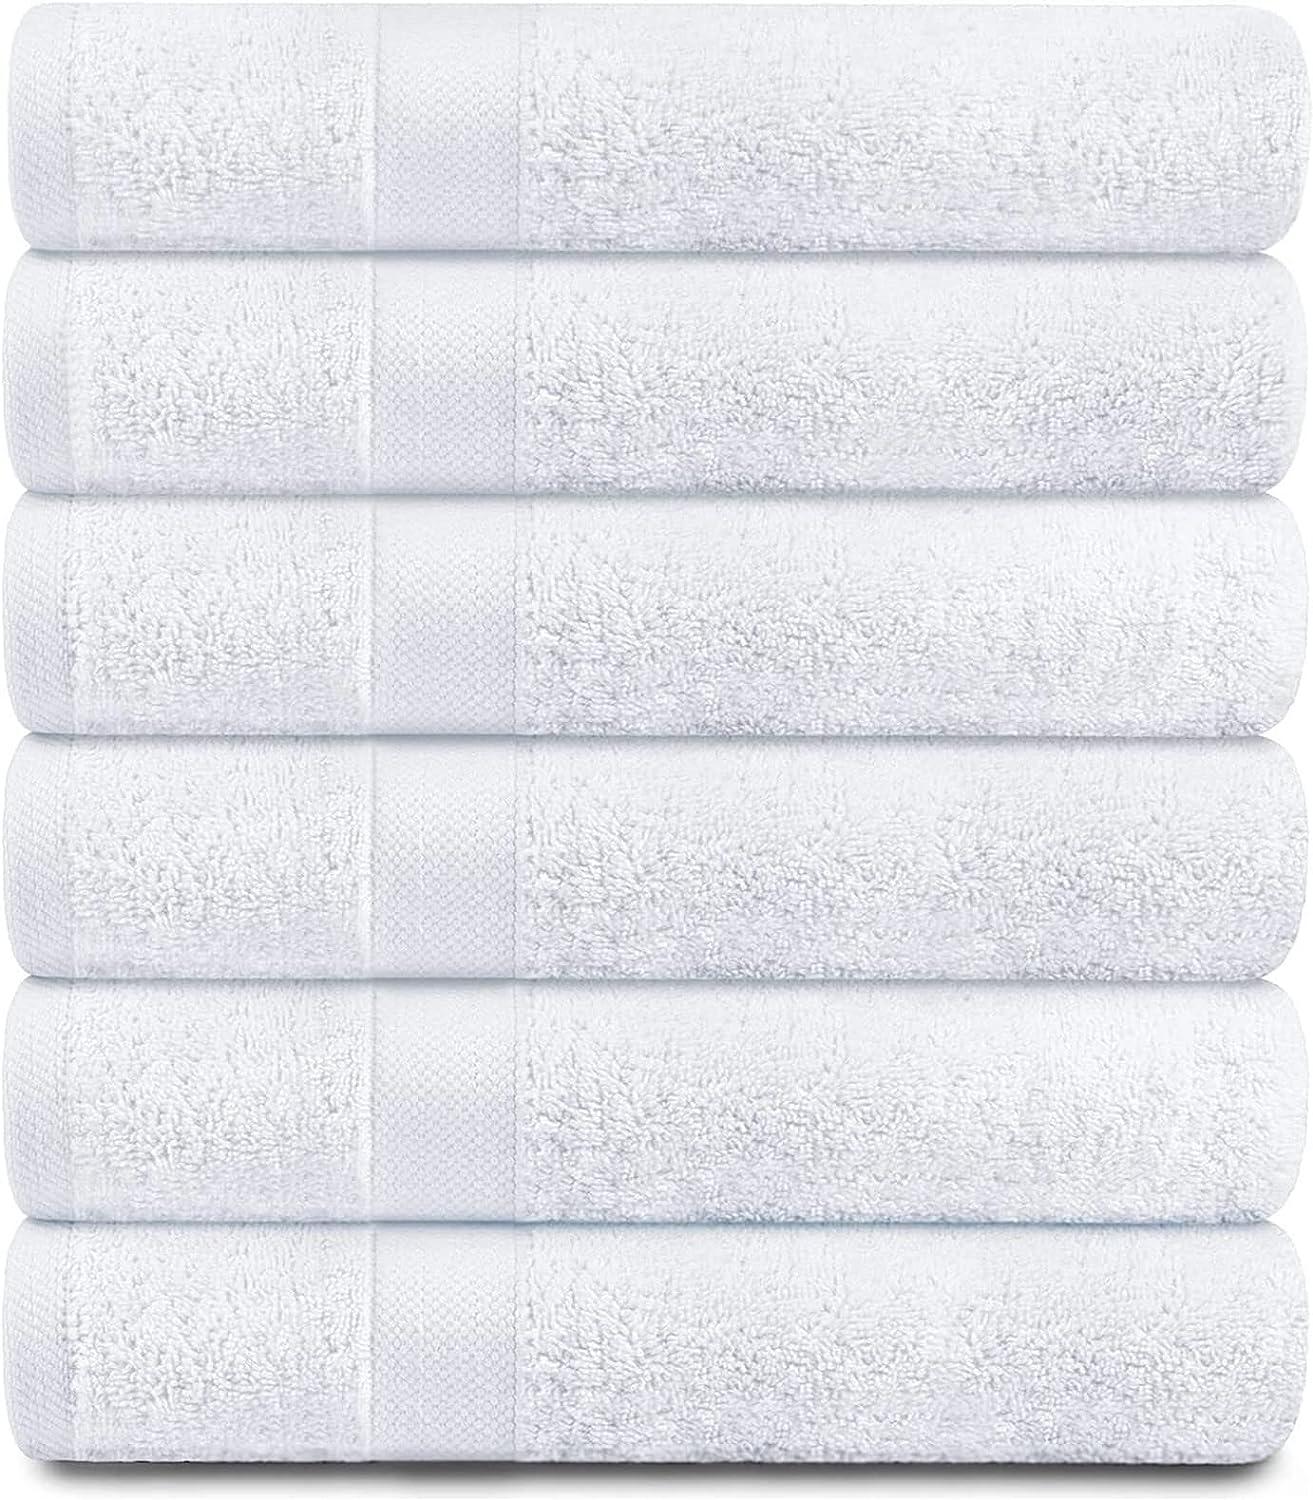  White Classic Luxury White Bath Towels Extra Large, 100% Soft  Cotton 700 GSM Thick 2Ply Absorbent Quick Dry Hotel Bathroom Towel for  Home, Gym, Pool, 27x54 Inch, White